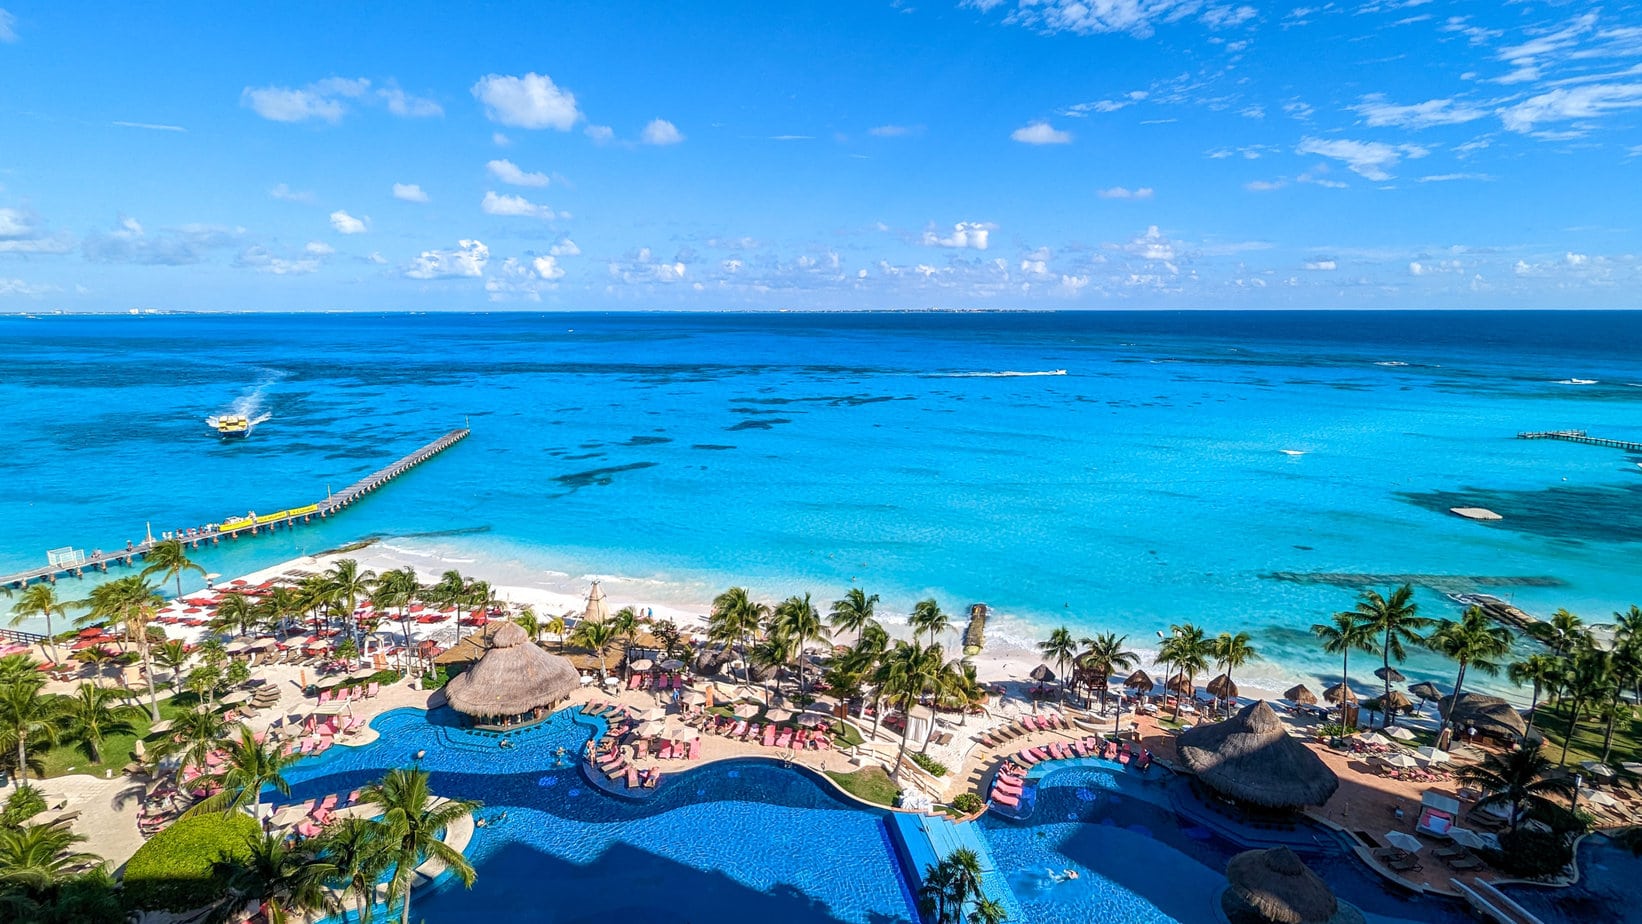 view from above of a large outdoor pool in frotn of a white sandy beach with the turquoise sea behind on a very sunny day. there is a narrow wooden pier to the left and a yellow board approaching. Grand Fiesta Americana Coral Beach Cancun review.